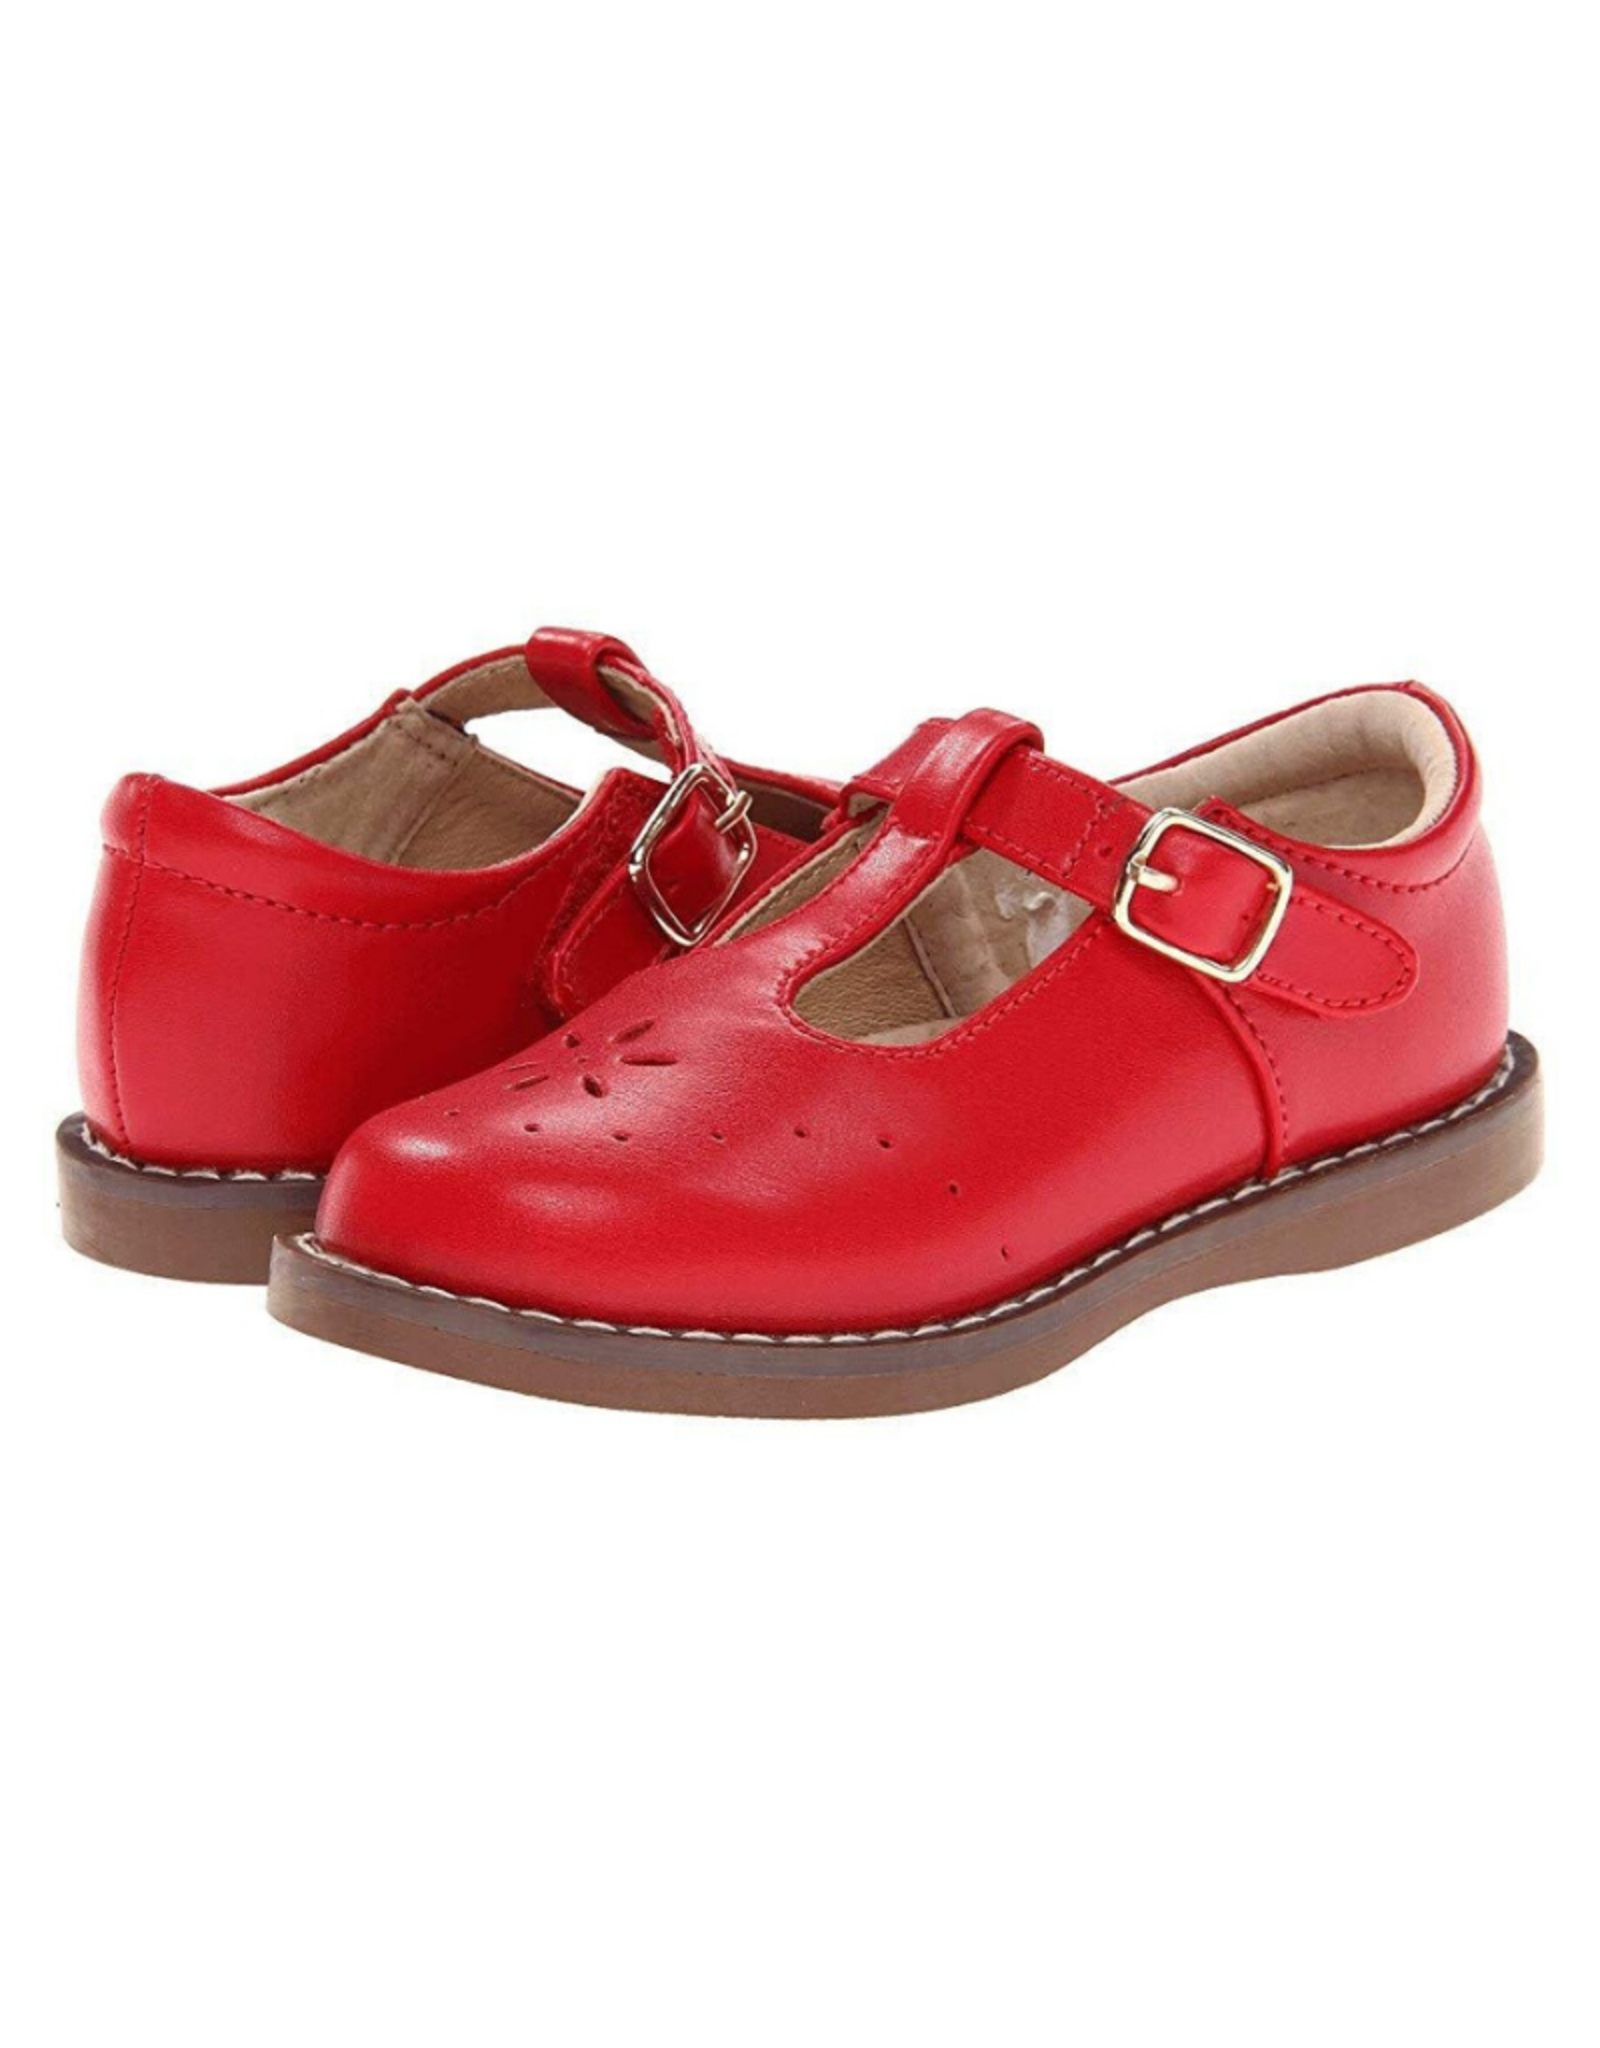 Footmates Sherry Apple Red